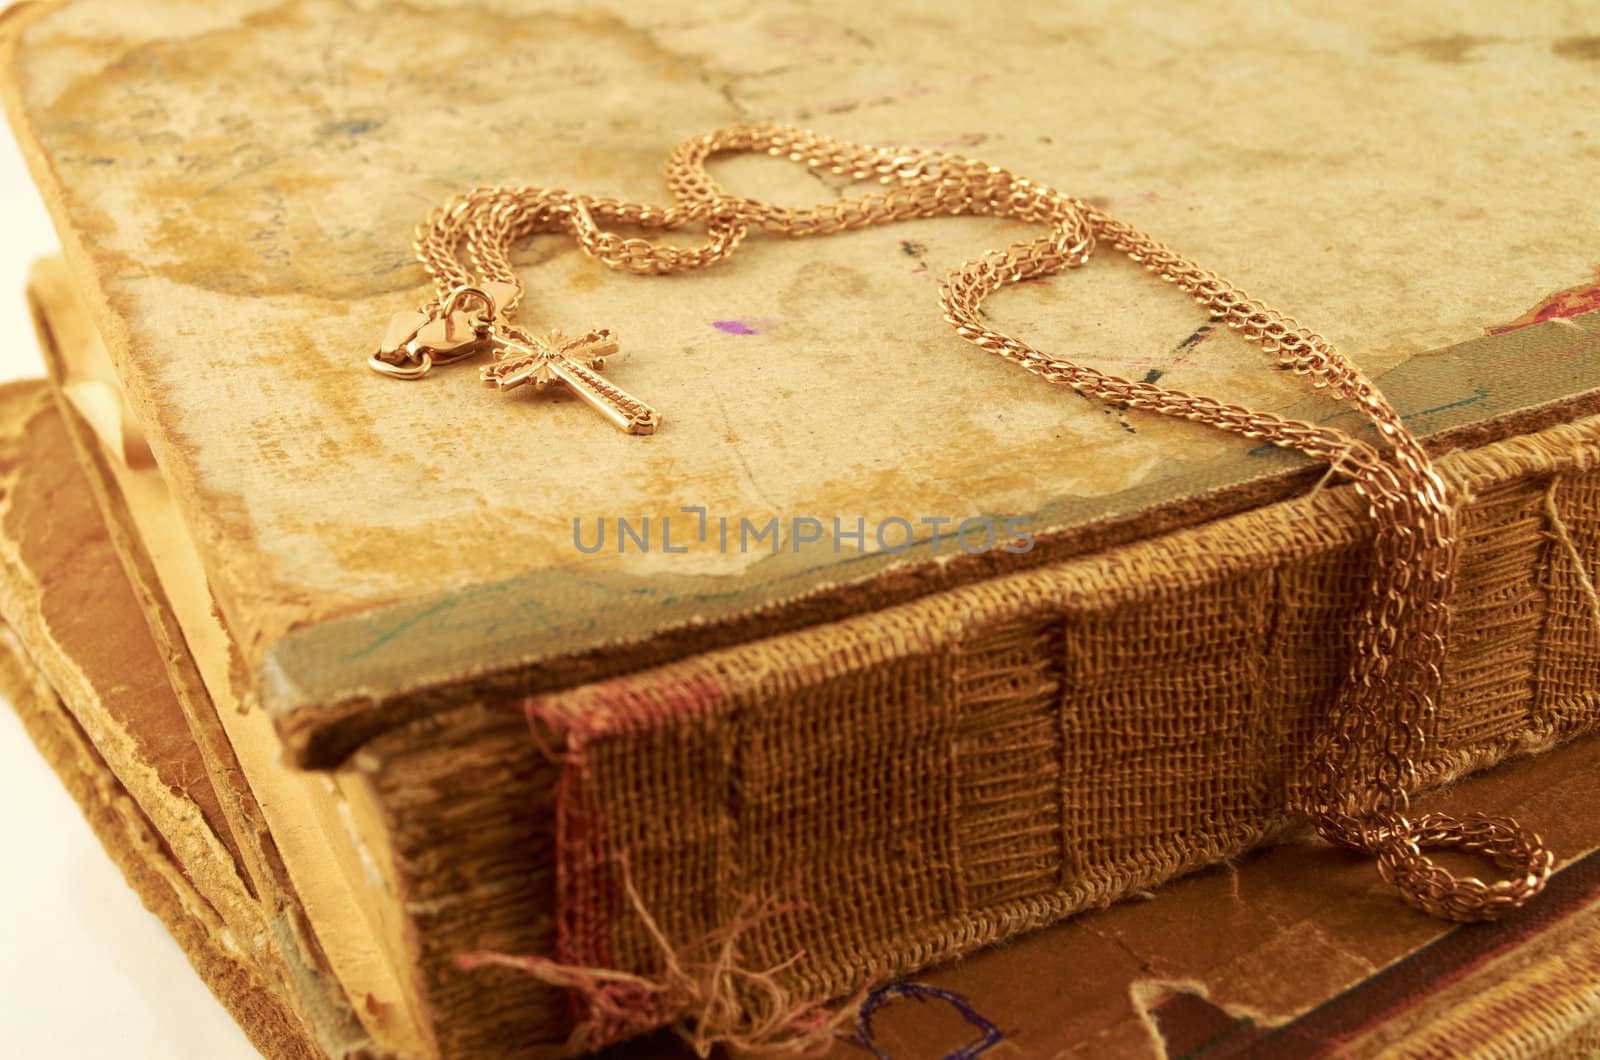 Gold chain with a cross on a background of old battered books